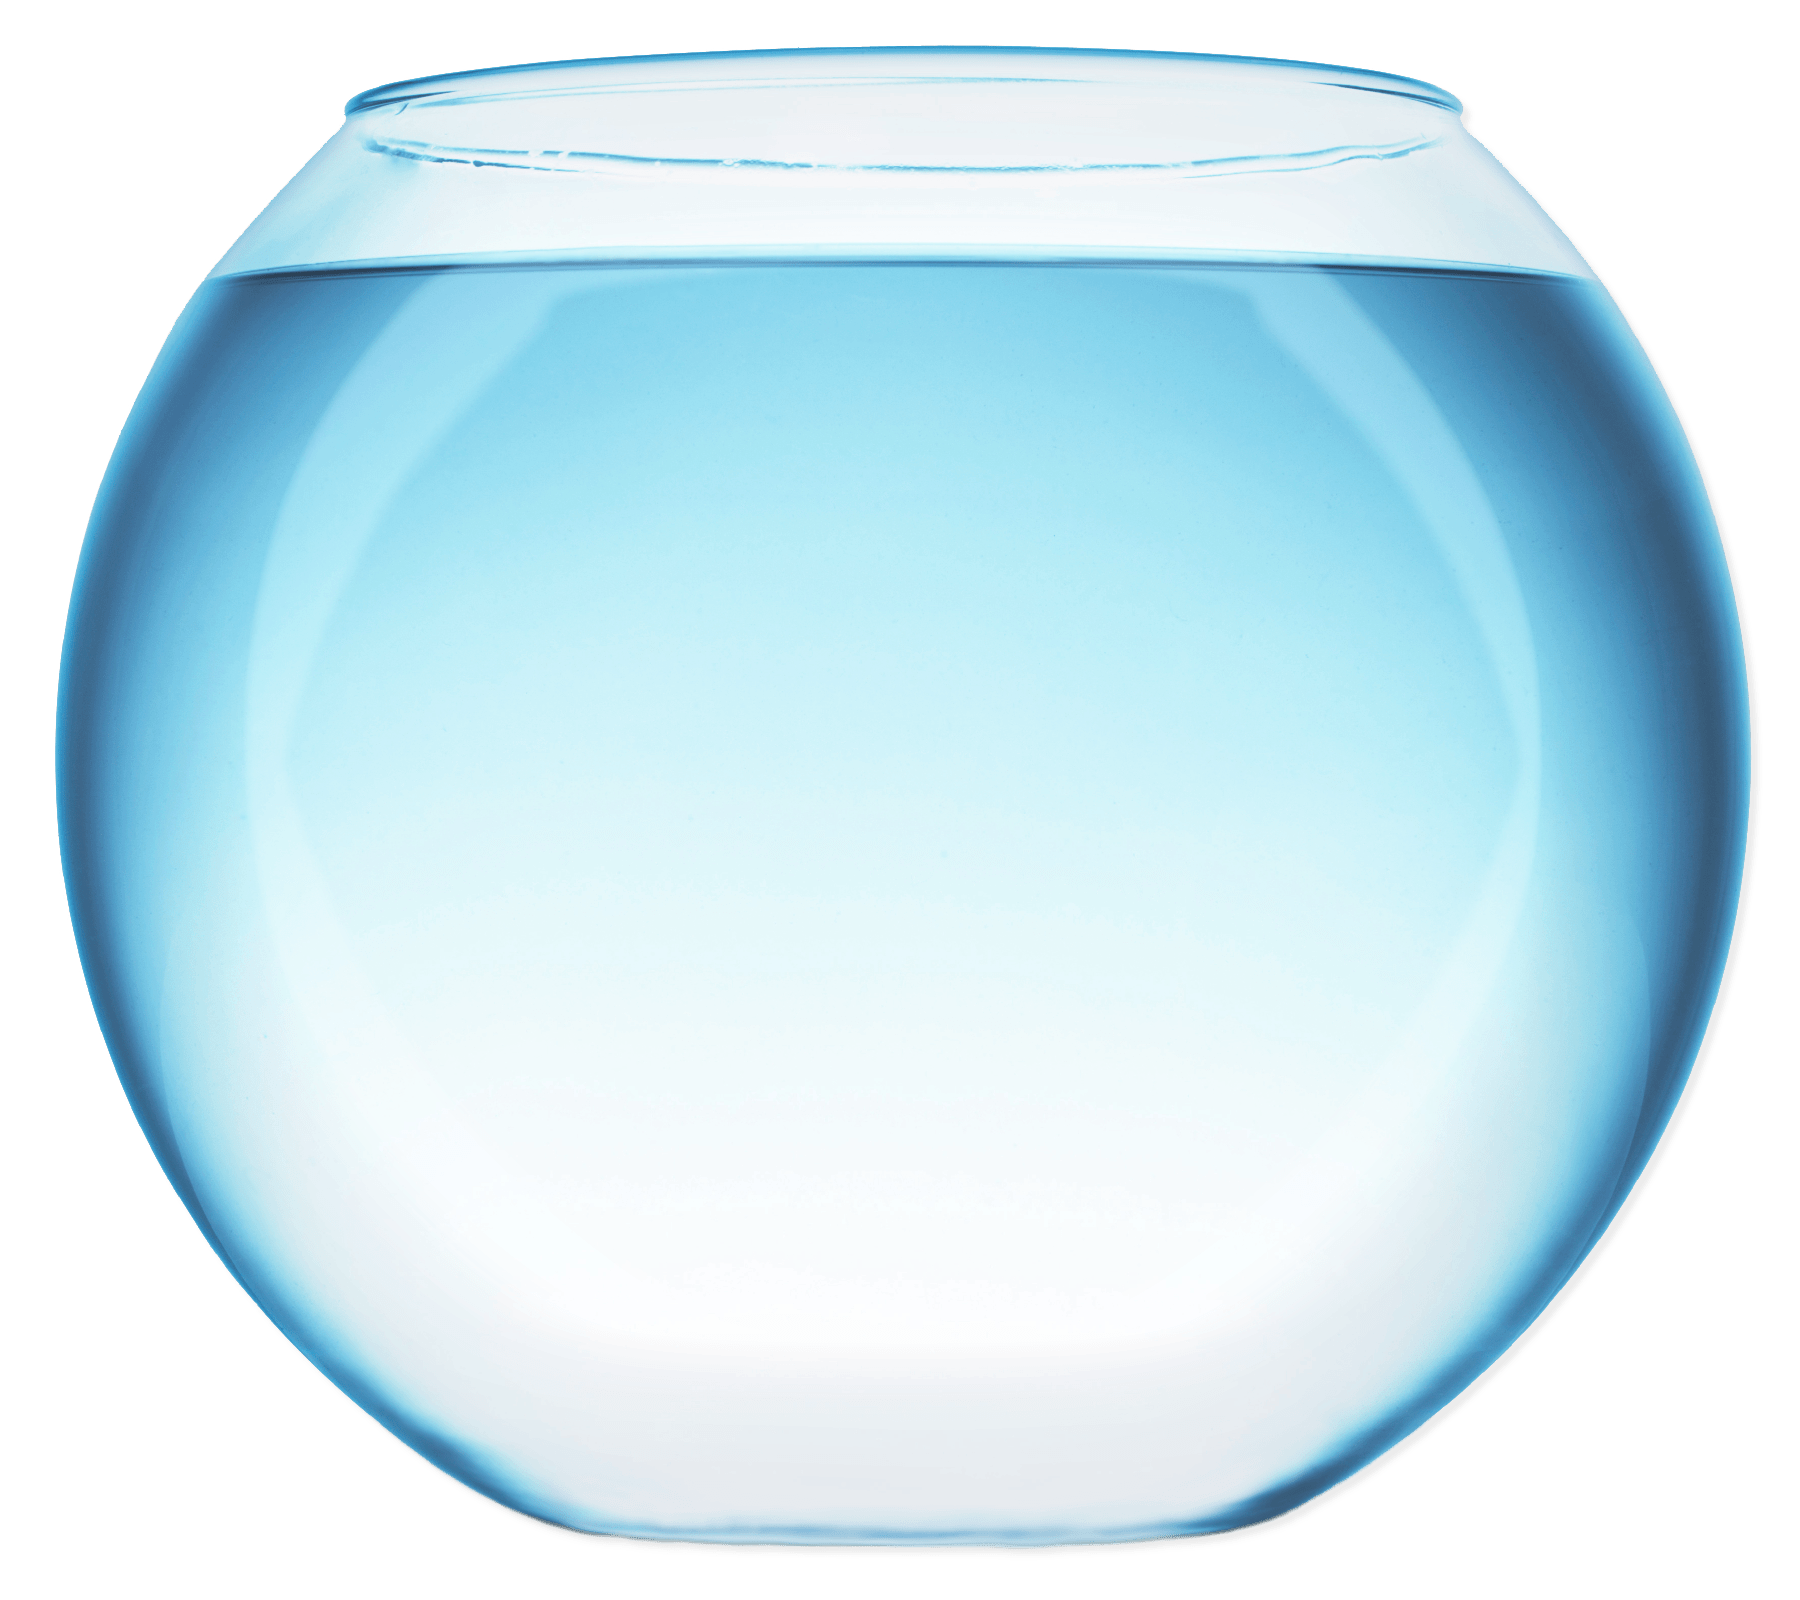 Fish Bowl With Water Clip arts